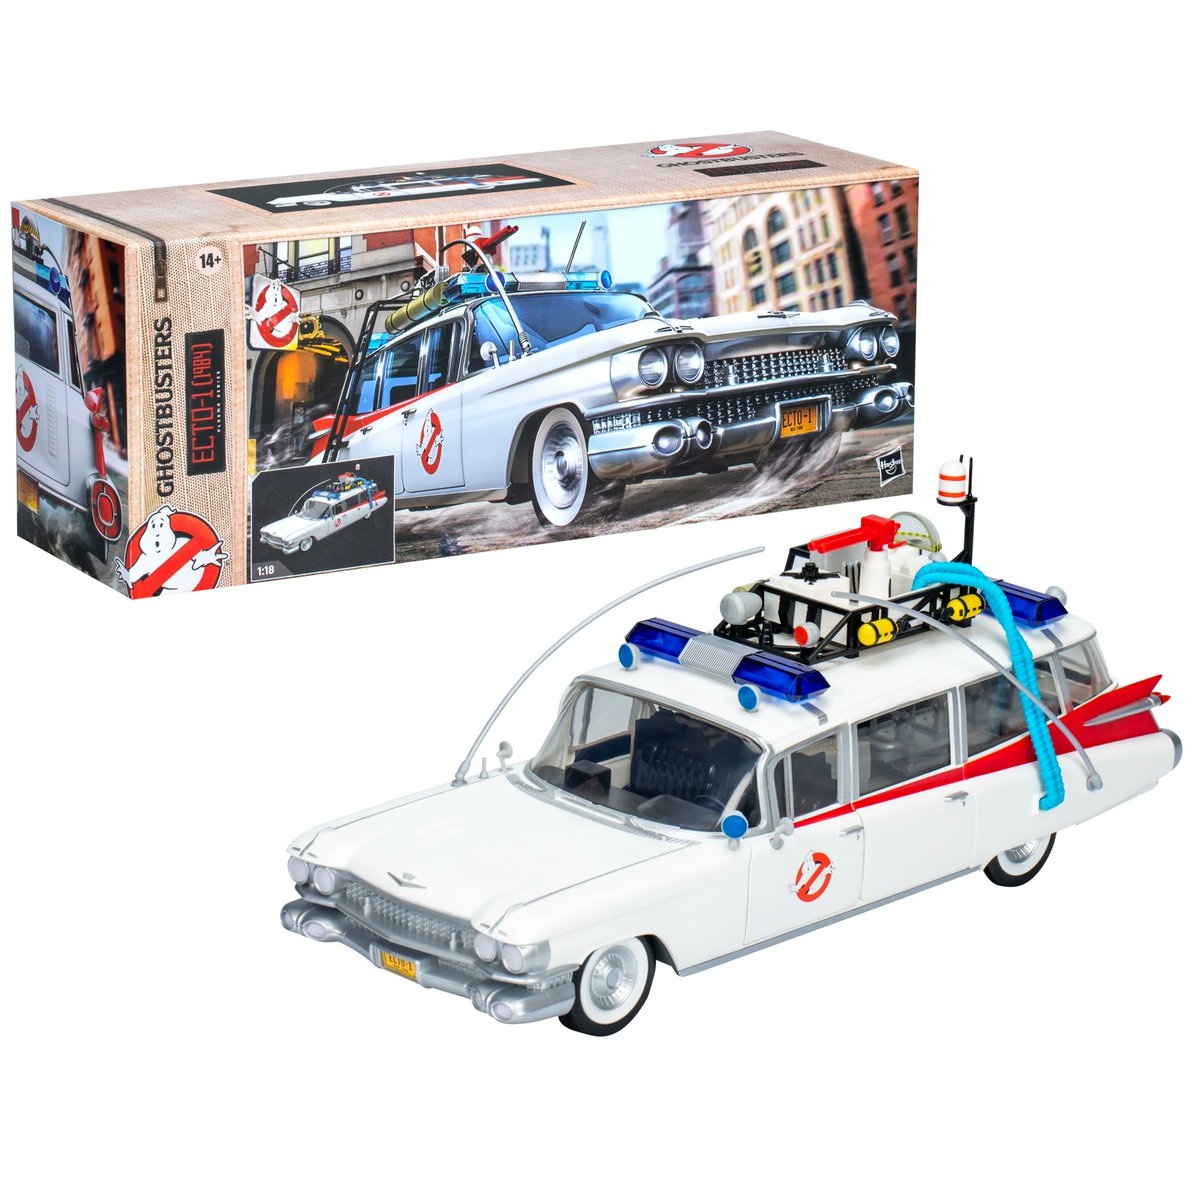 Ghostbusters Plasma Series Ecto-1 (1984), 1:18 Scale Toy Car by Hasbro. In stock! #Ghostbusters #affiliate Now available to order from Amazon. Amazon🇺🇸US $59.99 amzn.to/3R3aK16